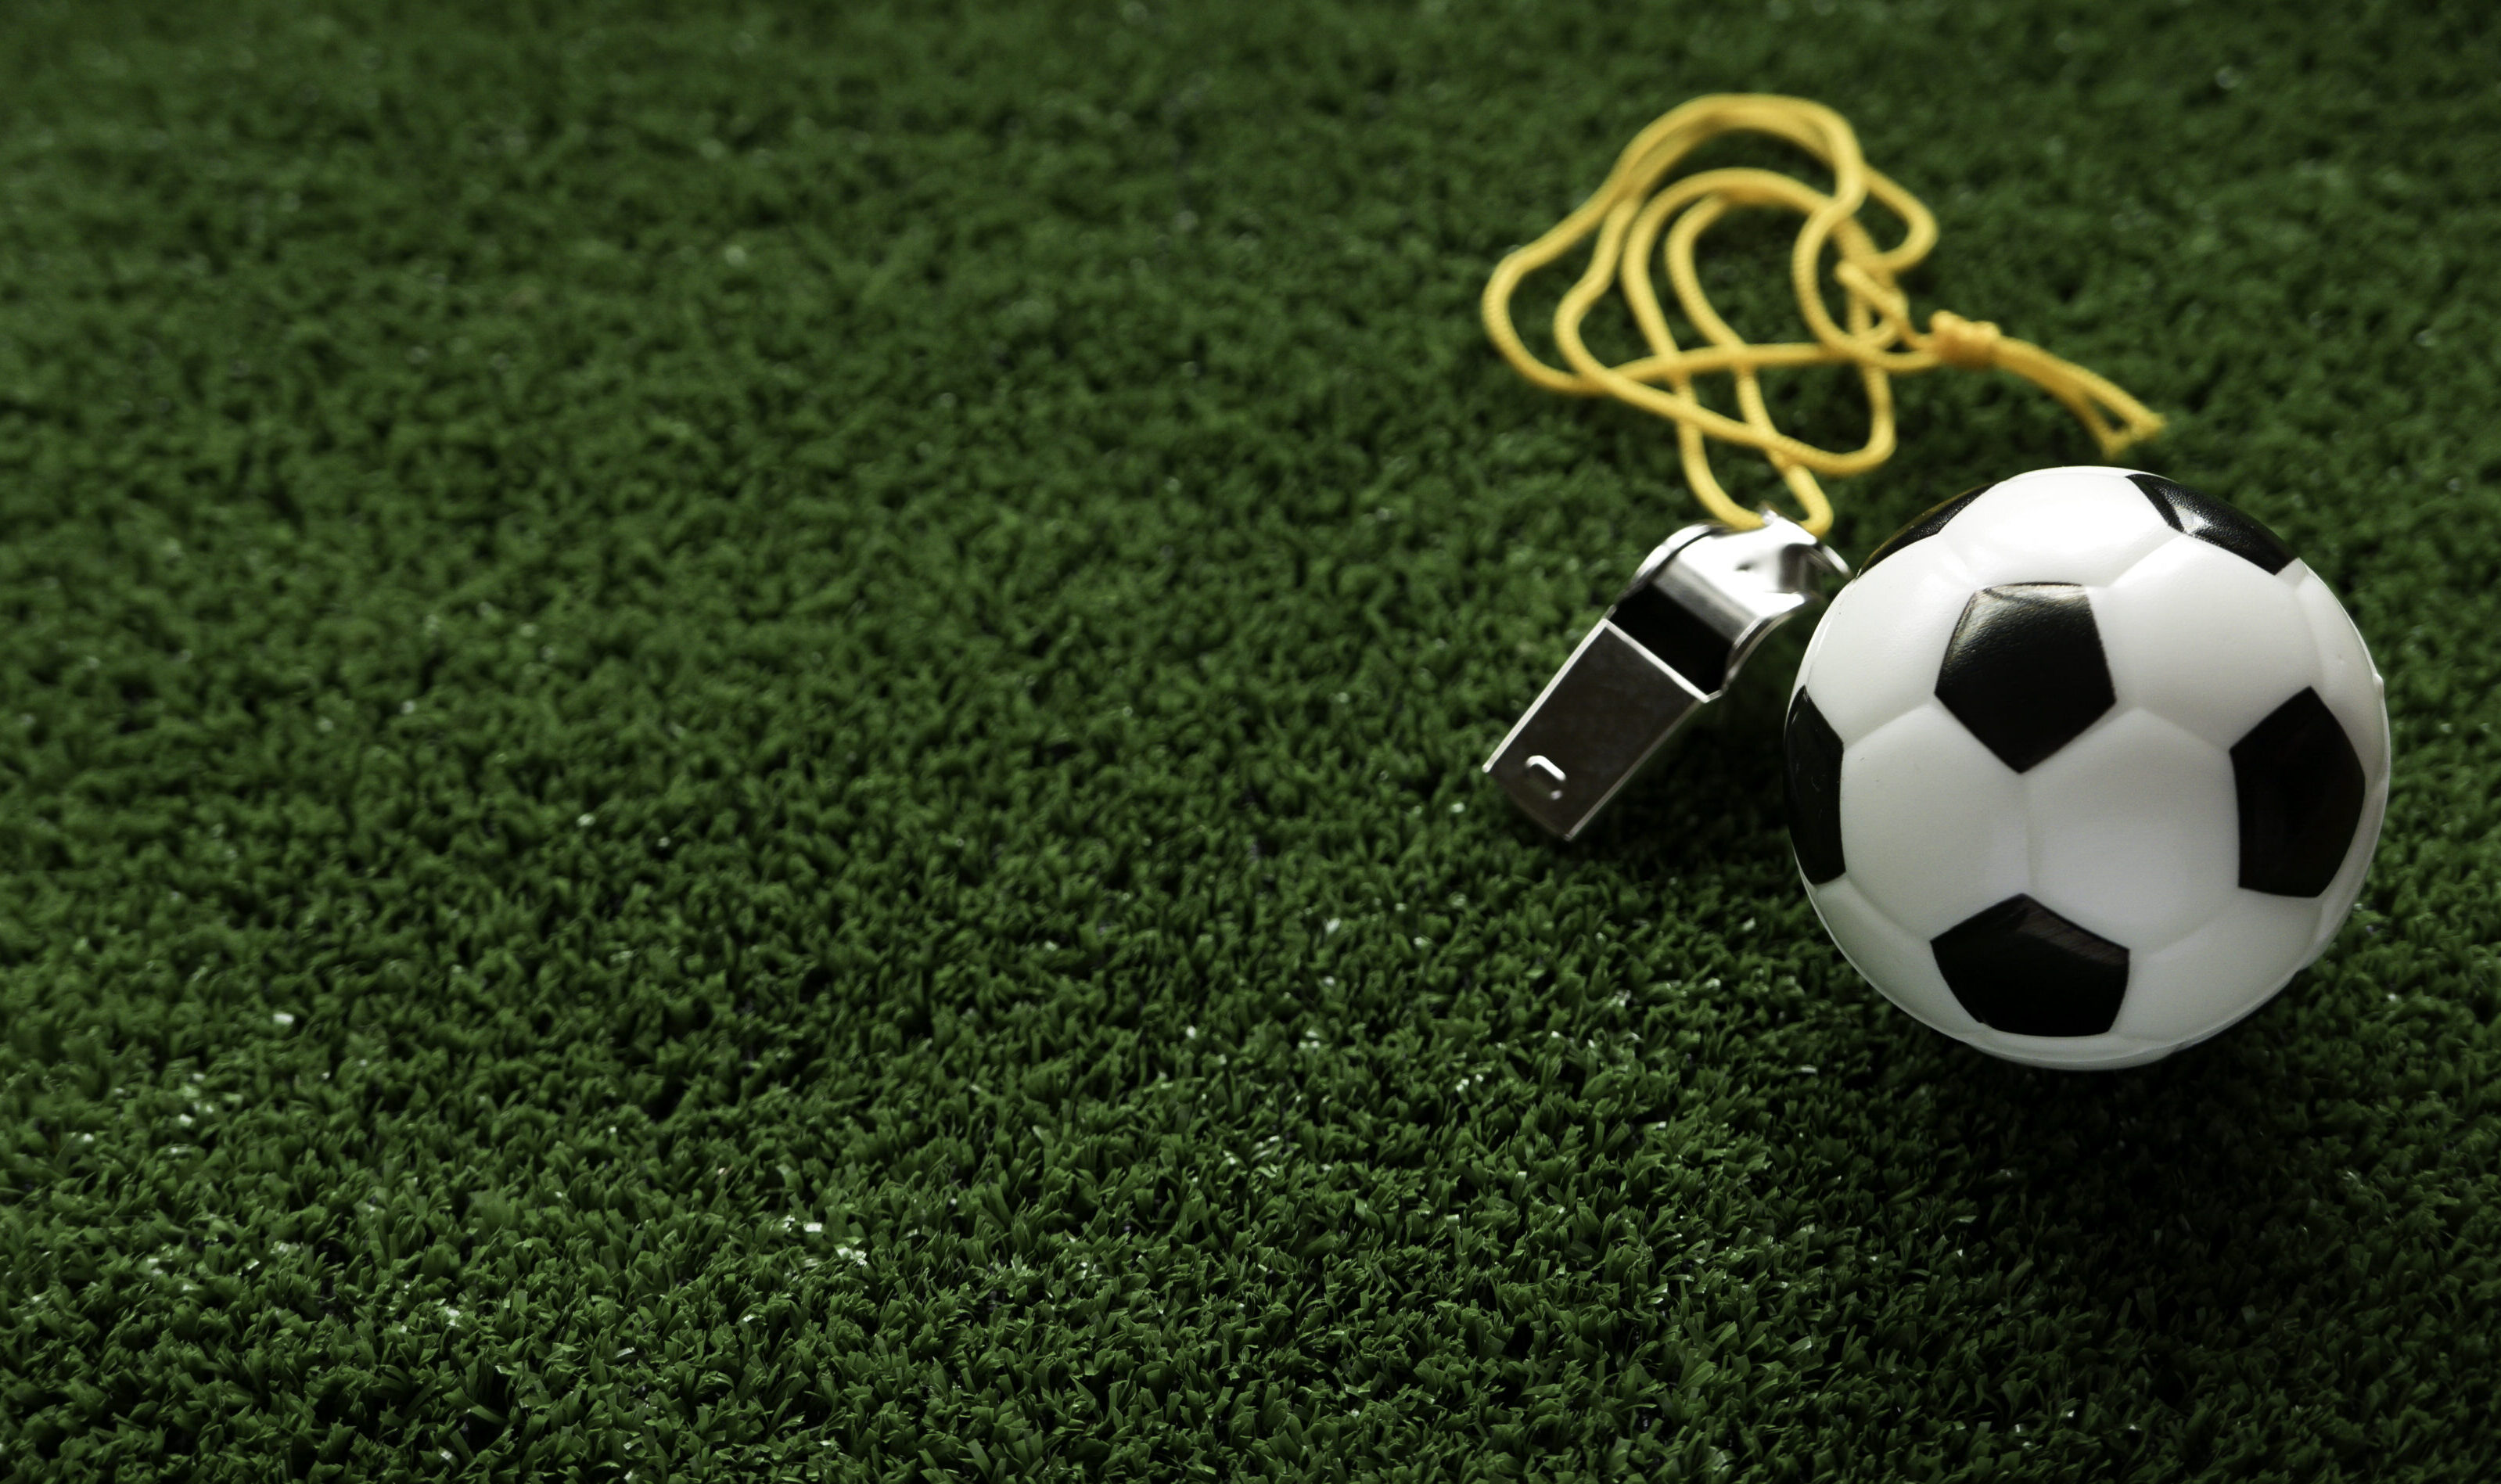 Soccer ball and a whistle on a football field.